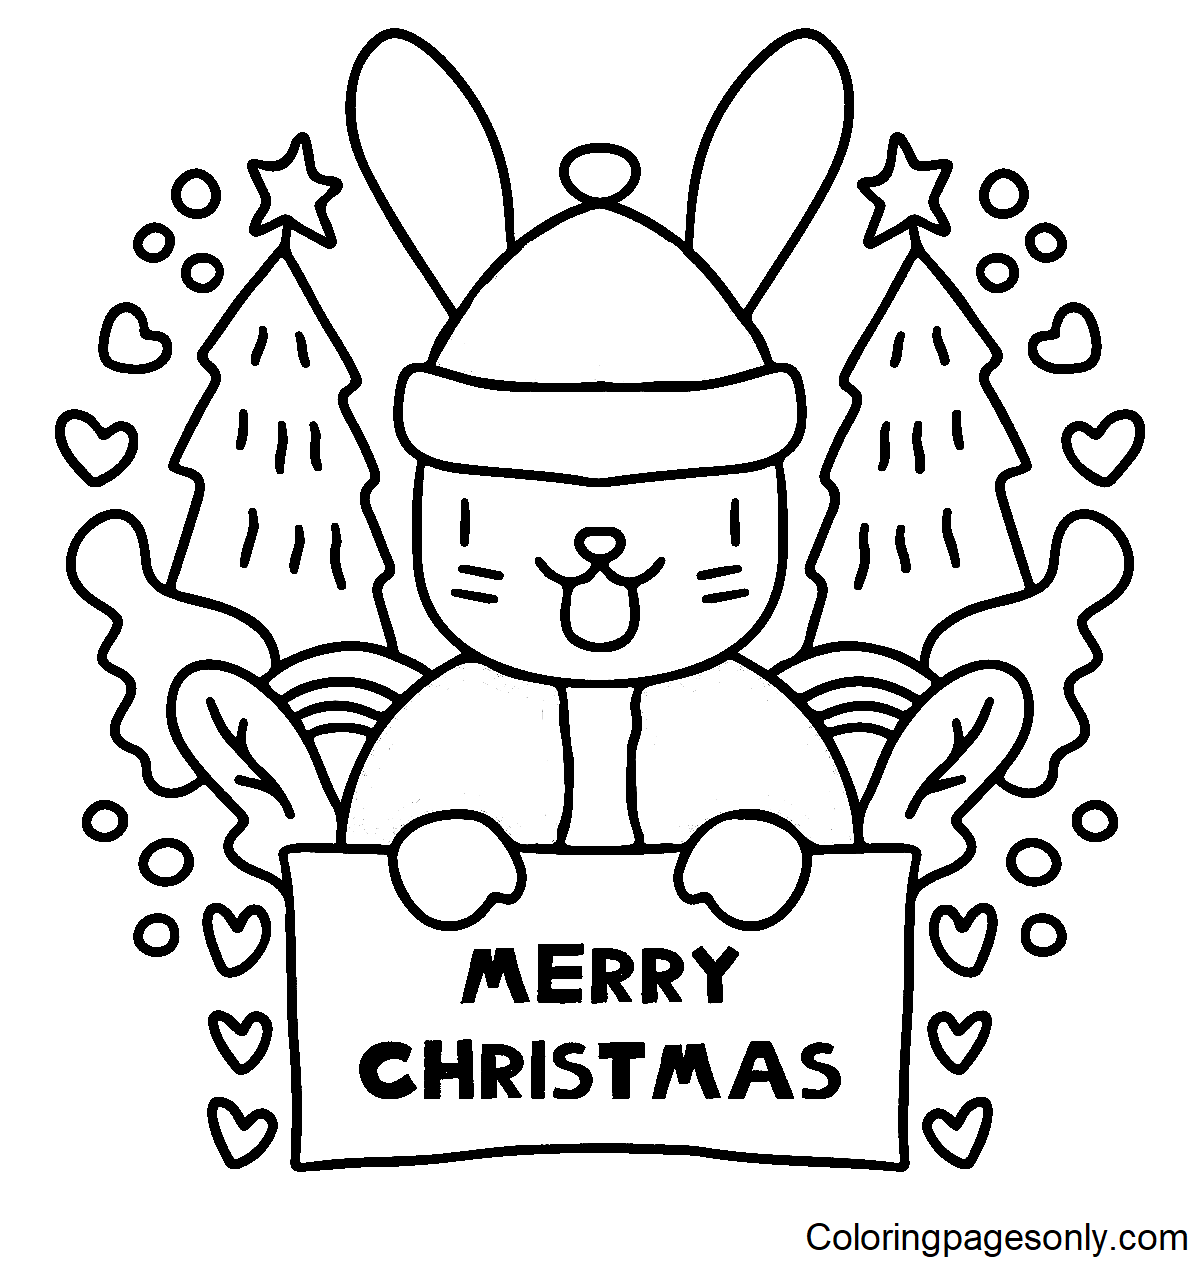 Bunny Merry Christmas Coloring Pages